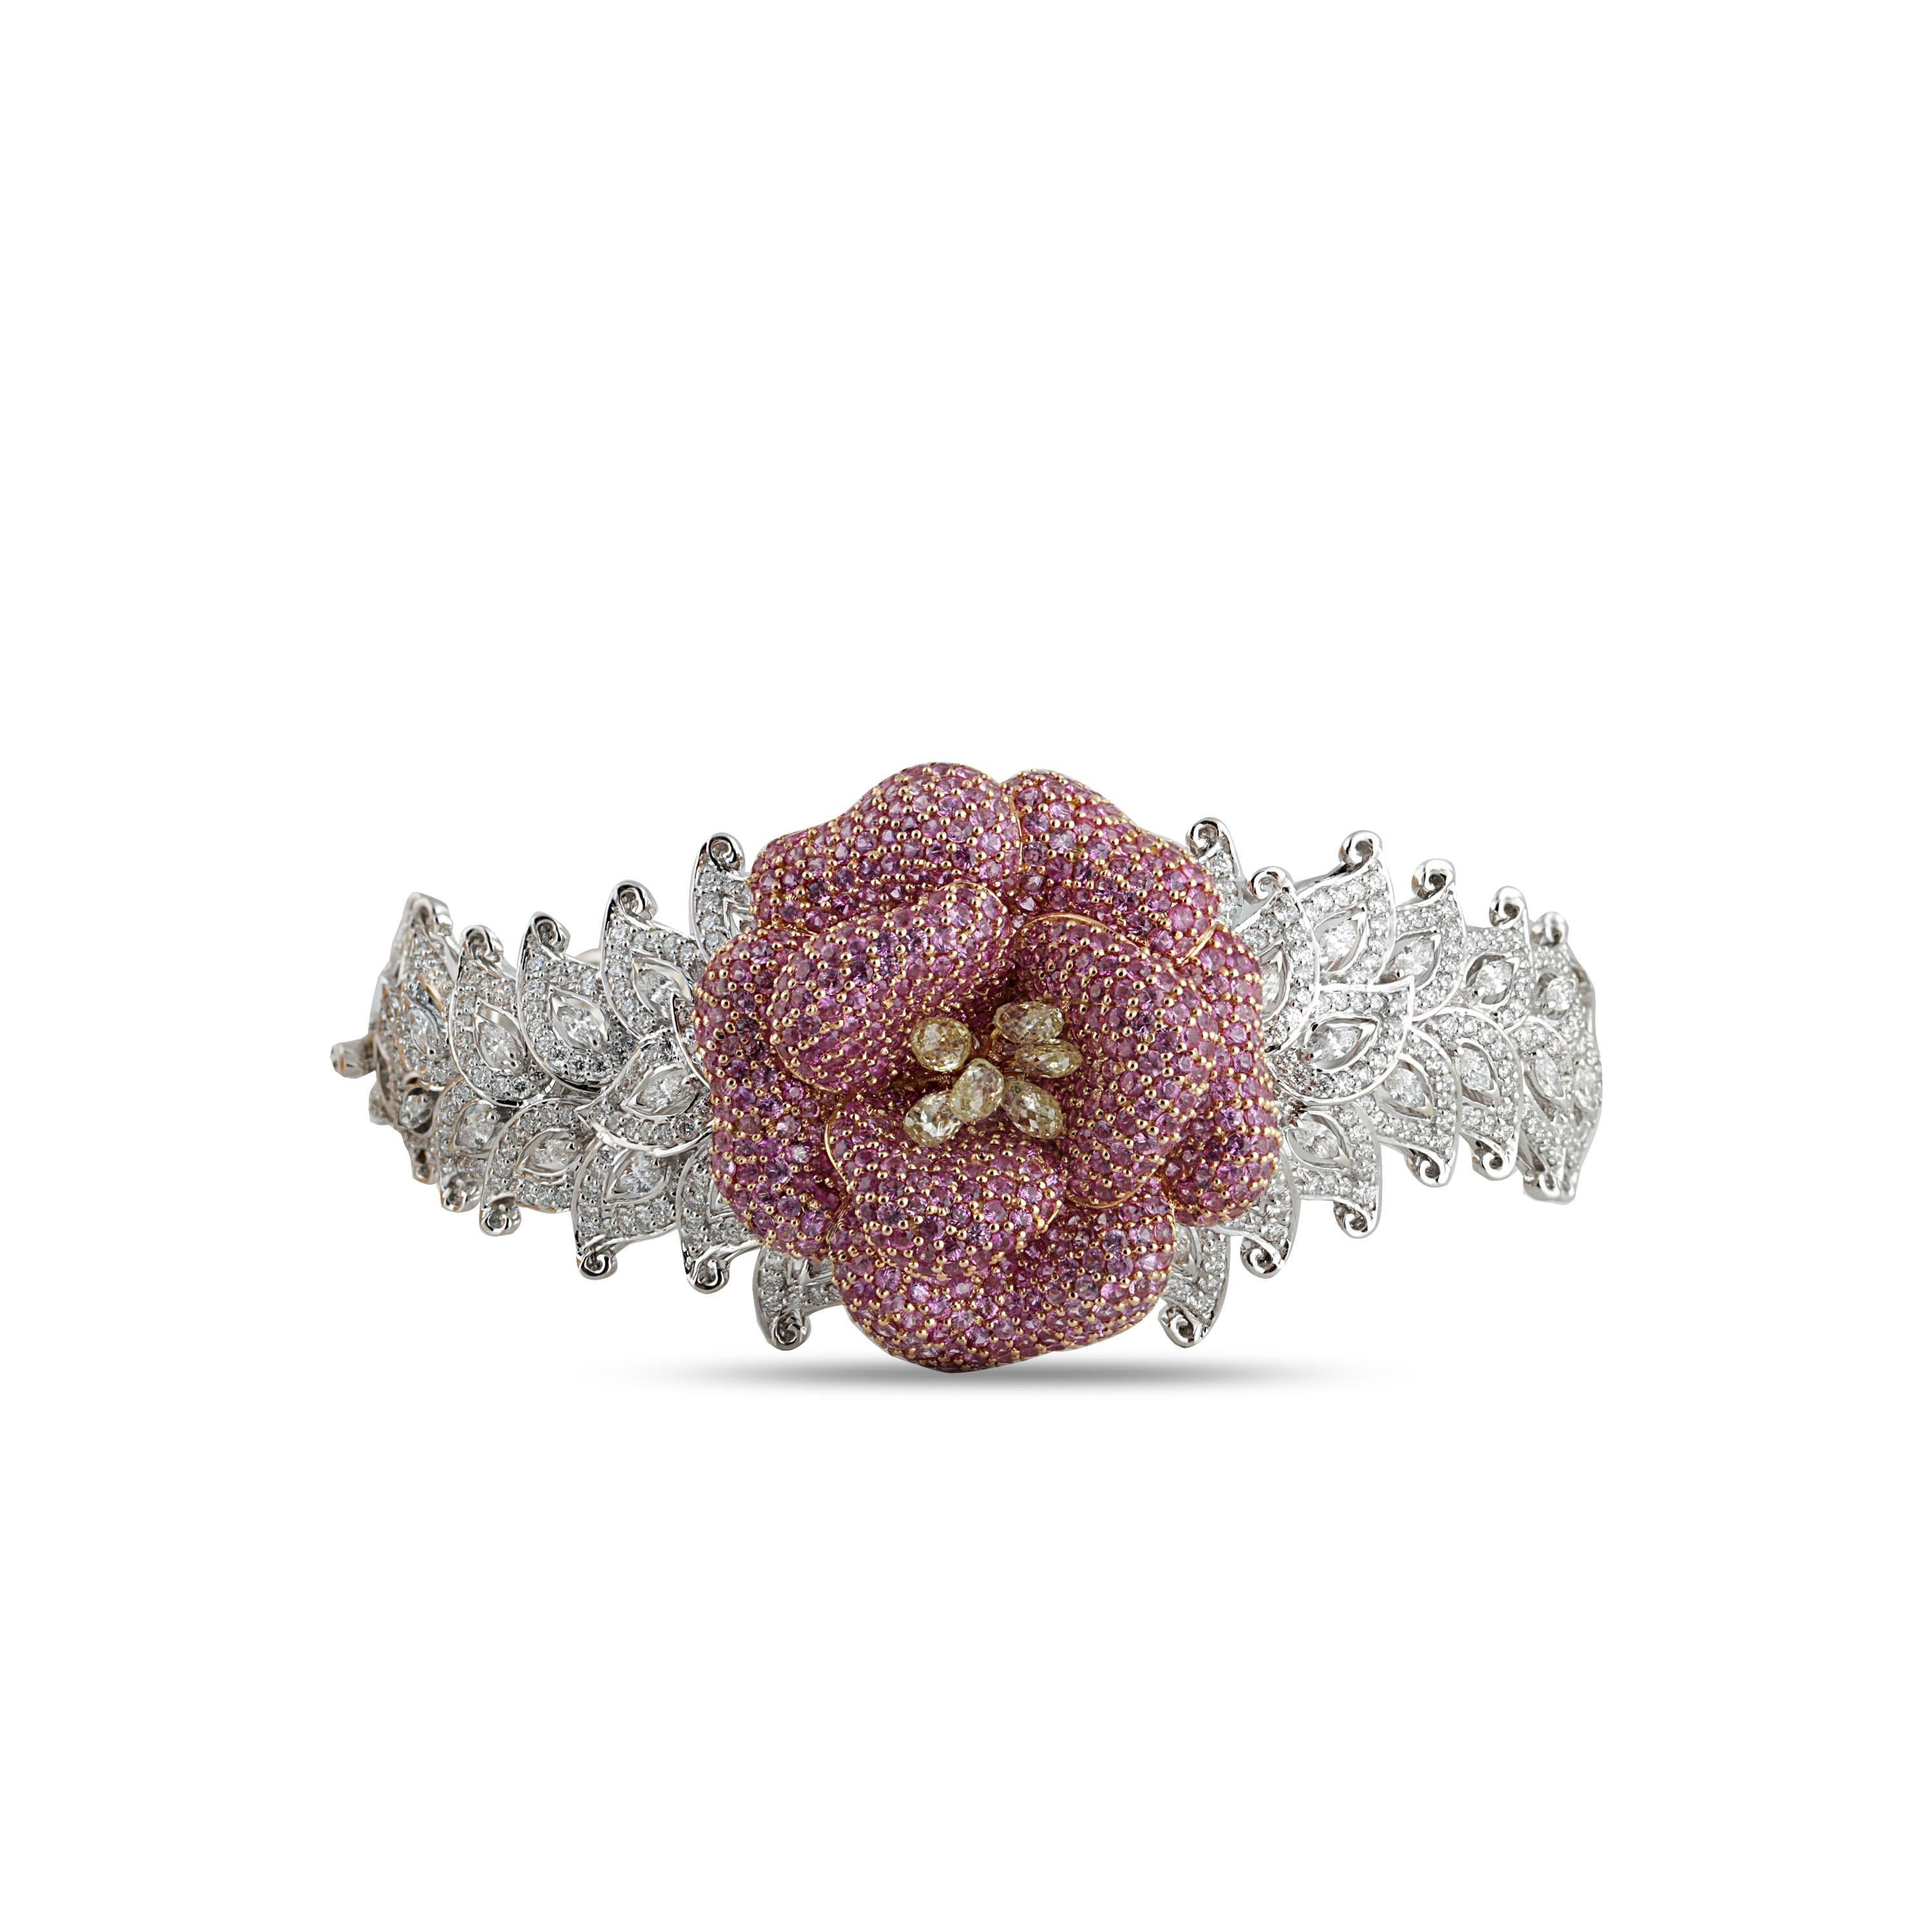 Drawing inspiration from the beauty and charm of nature is this uniquely designed bracelet in 18K white and rose gold, generously adorned with 1,170 stones including yellow briolettes, pink sapphires and marquise and round brilliant cut diamonds.